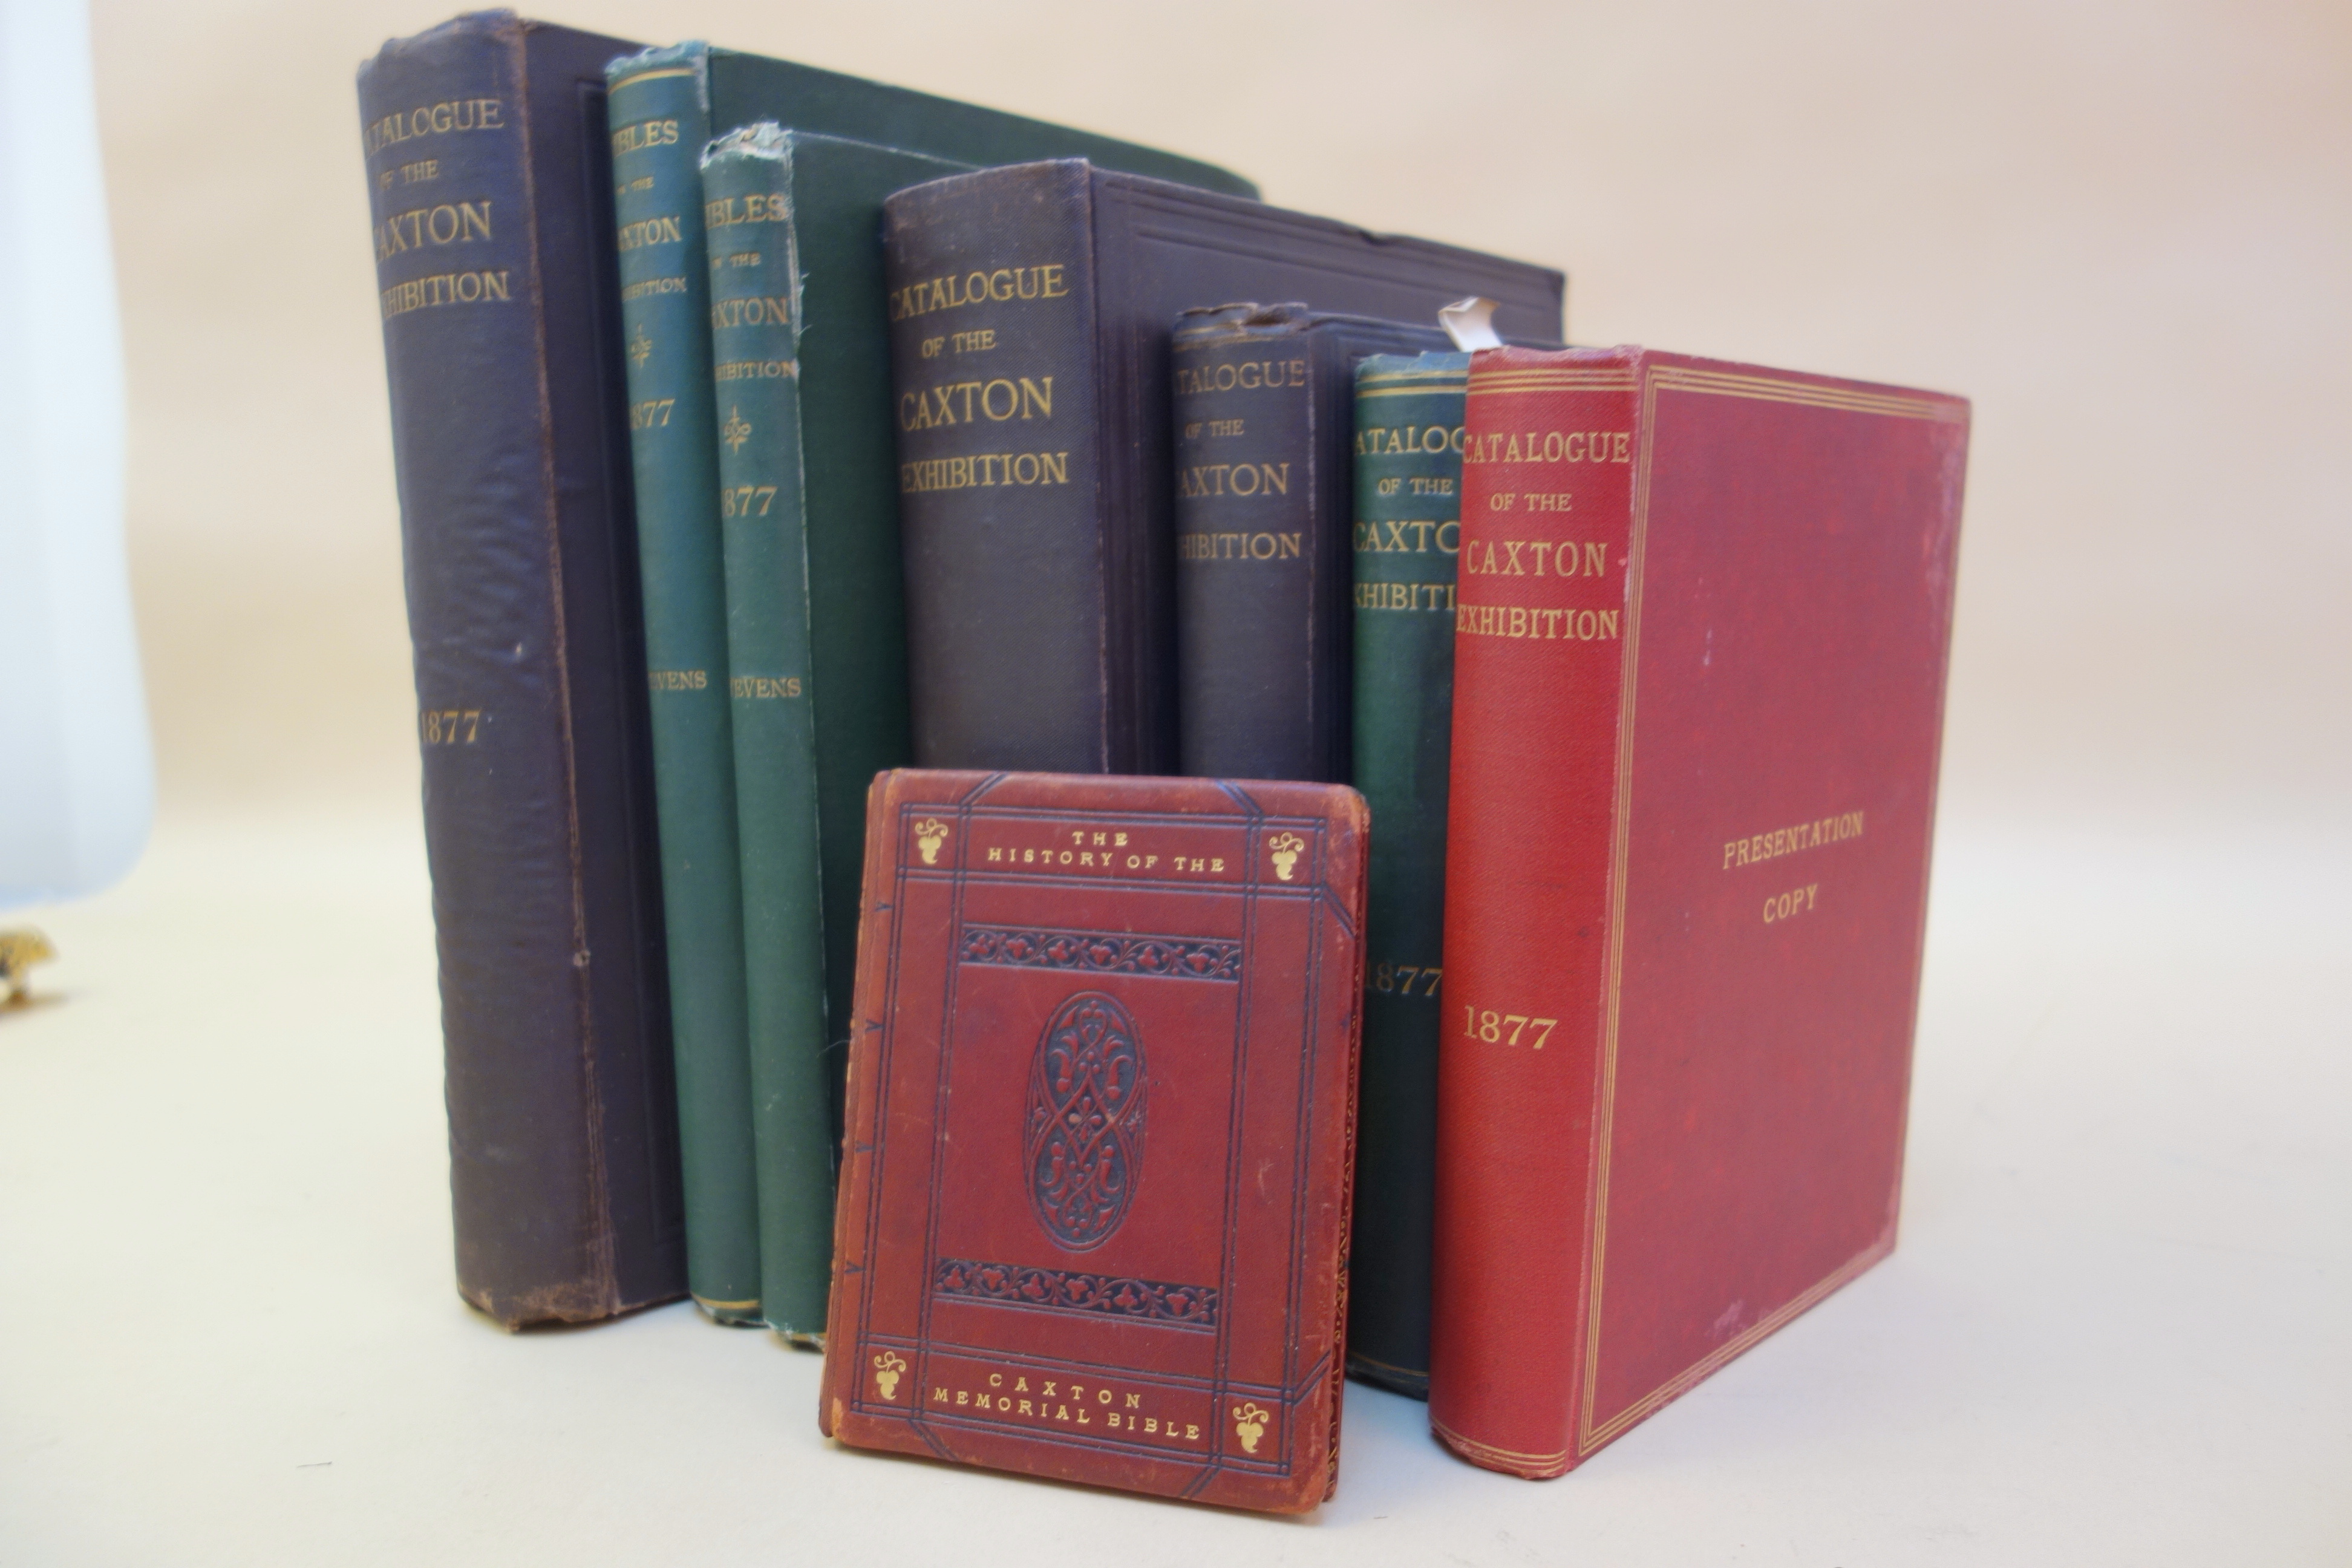 These are the variants of the cloth-bound catalogues of the Caxton Exhibition arranged in descending order by size; there were also versions issued in printed wrappers. The larger, thicker volumes in dark brown cloth are an extra large paper copy and a regular large paper copy; both versions of the large paper copies were issued on hand-made paper.